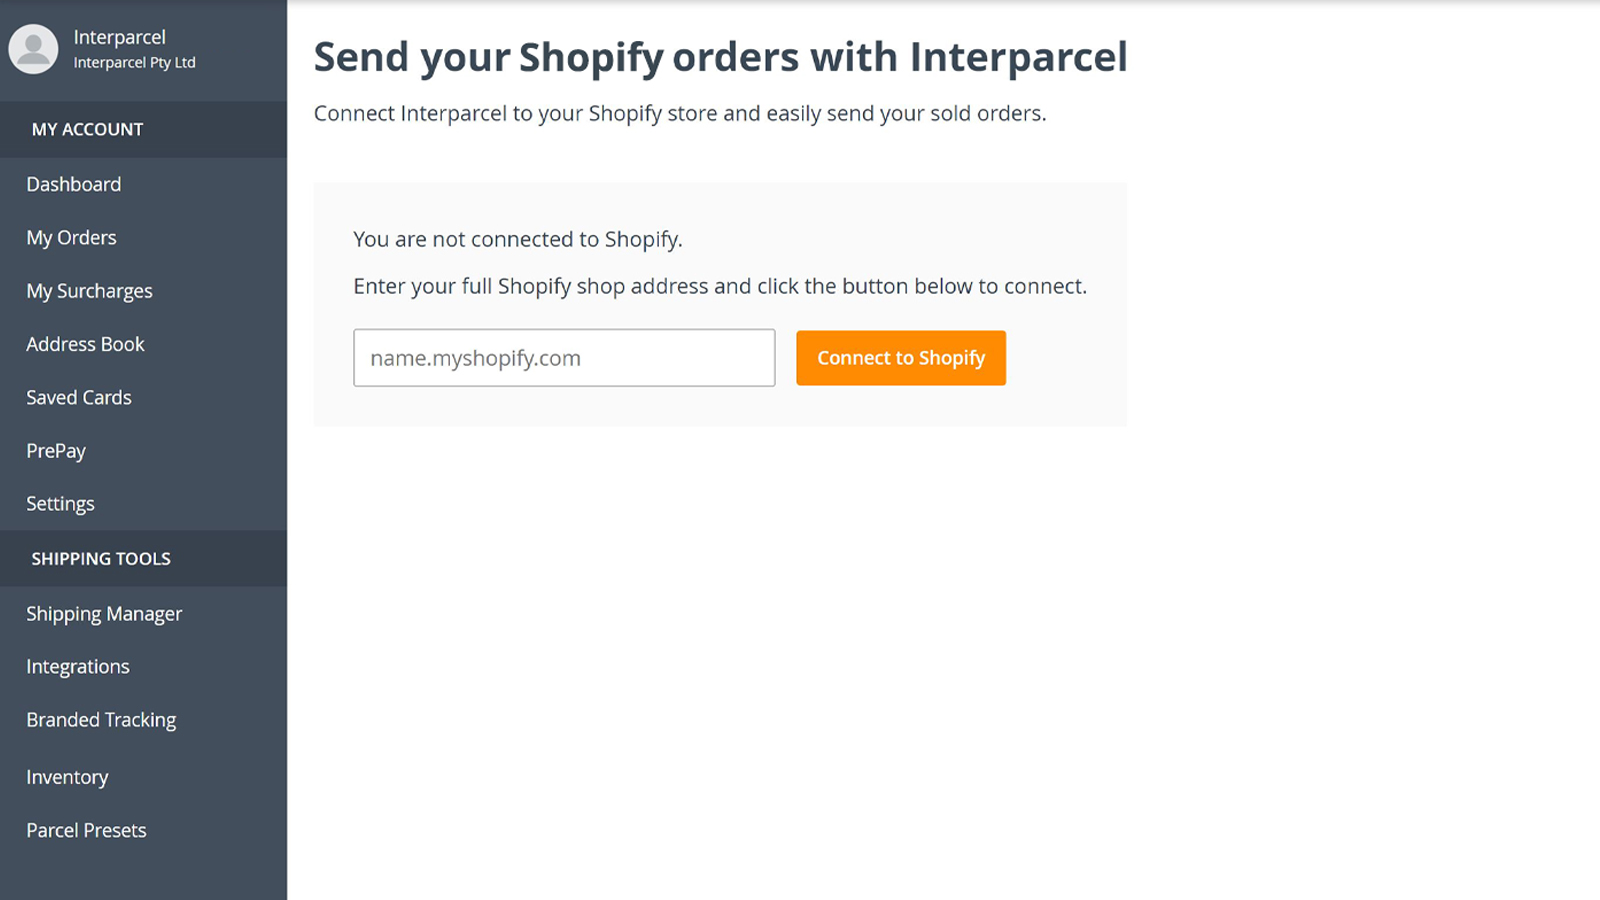 Simple and Easy Integration with Your Shopify Store 